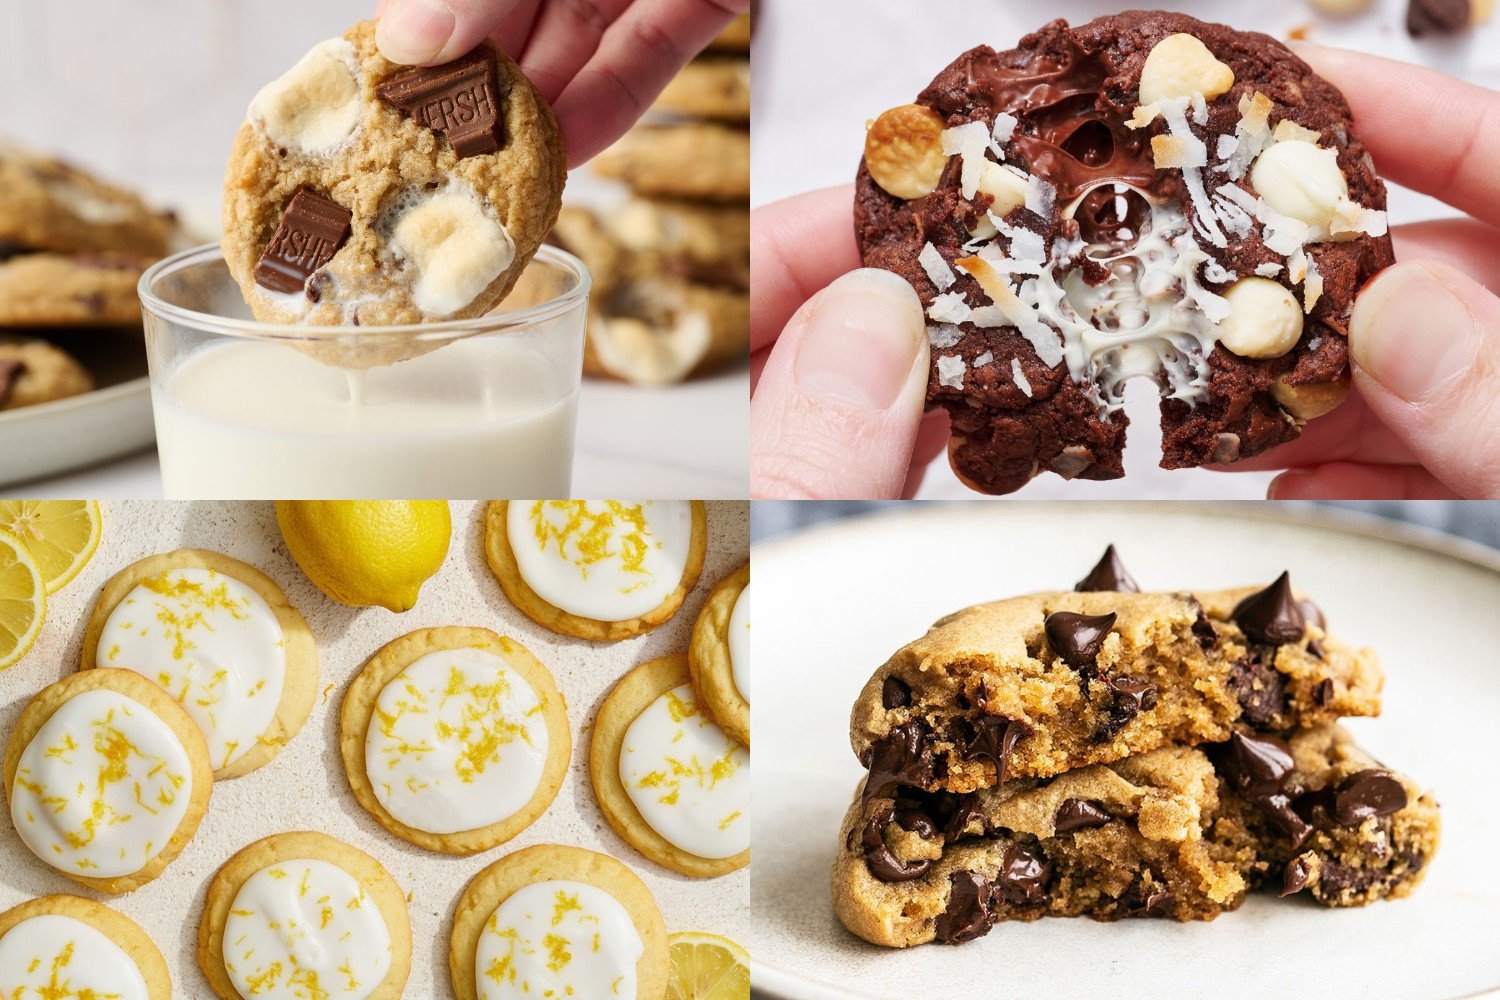 four easy cookie recipes: s'mores cookies, chocolate coconut cookies, glazed lemon cookies, and peanut butter chocolate chip cookies.